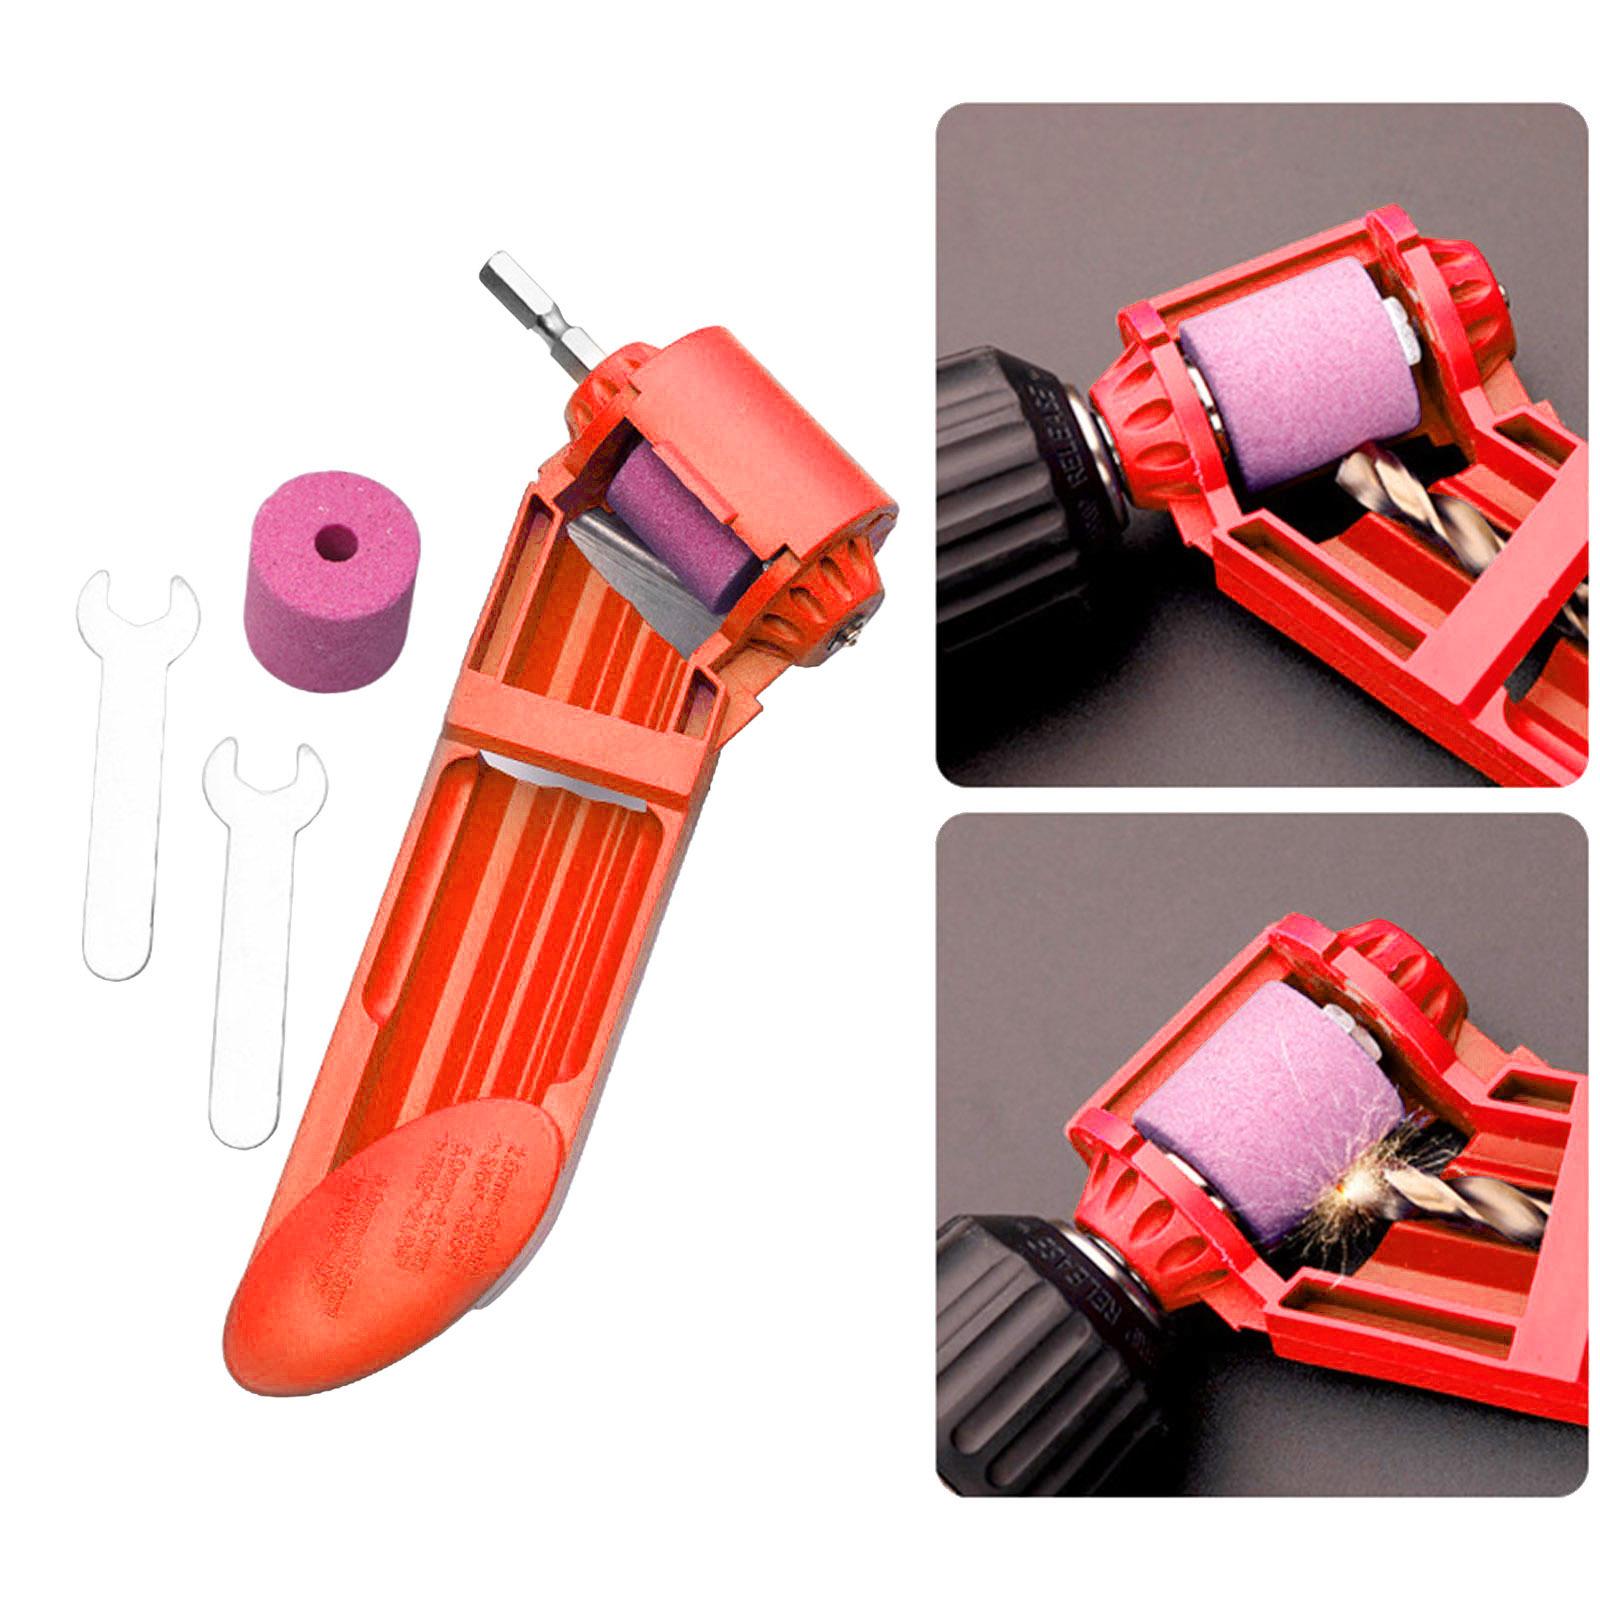 Drill Bit Sharpeners for Step Drill Accessories Woodworking Metalworking orange